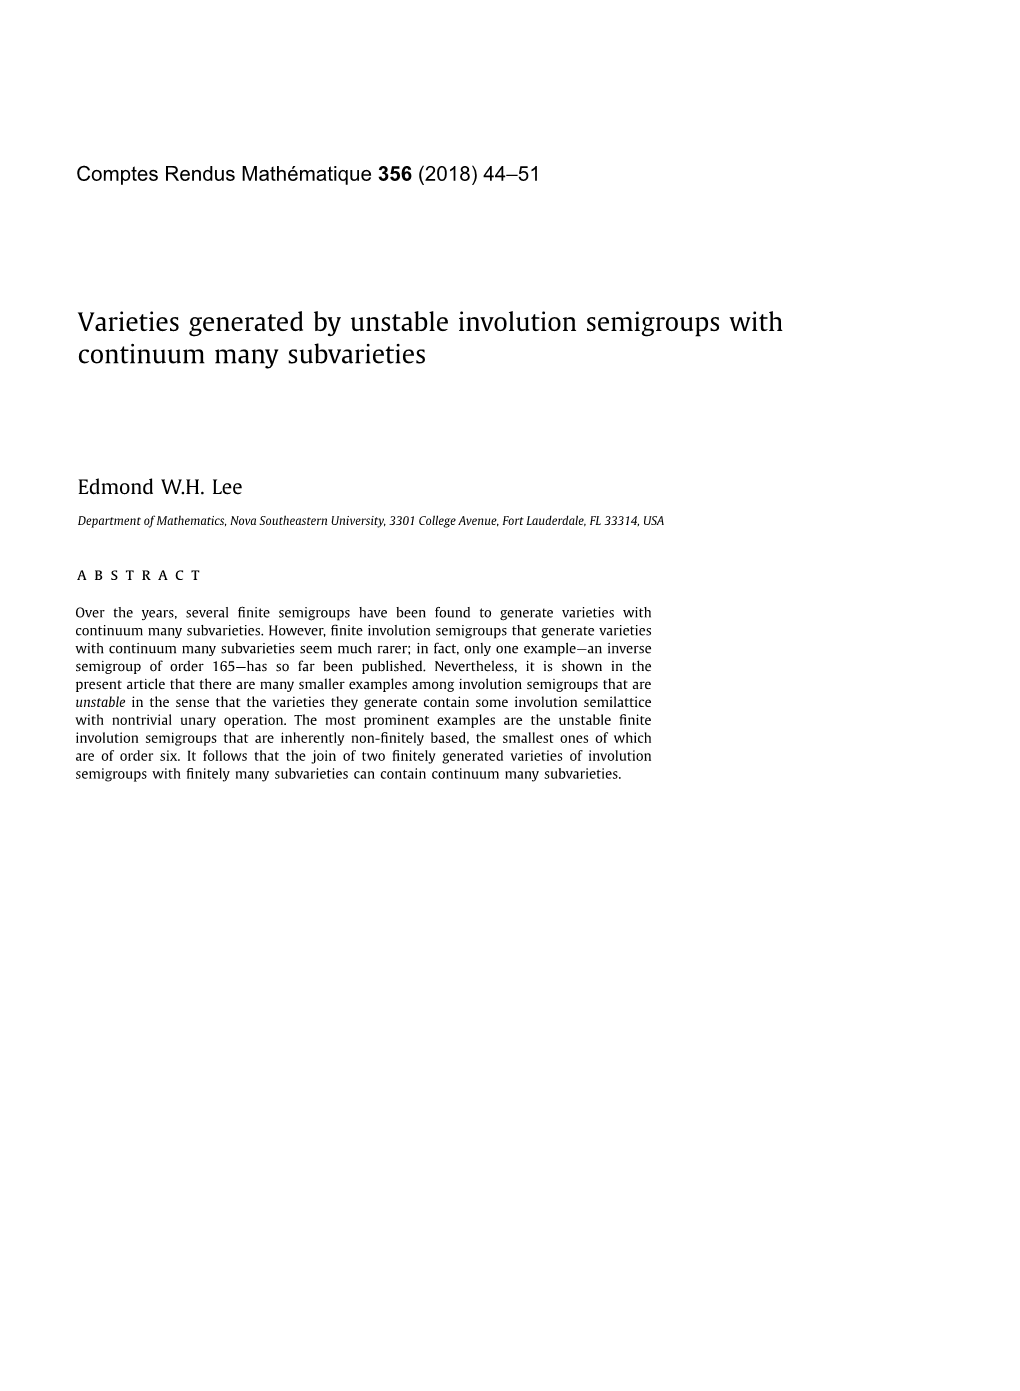 Varieties Generated by Unstable Involution Semigroups with Continuum Many Subvarieties